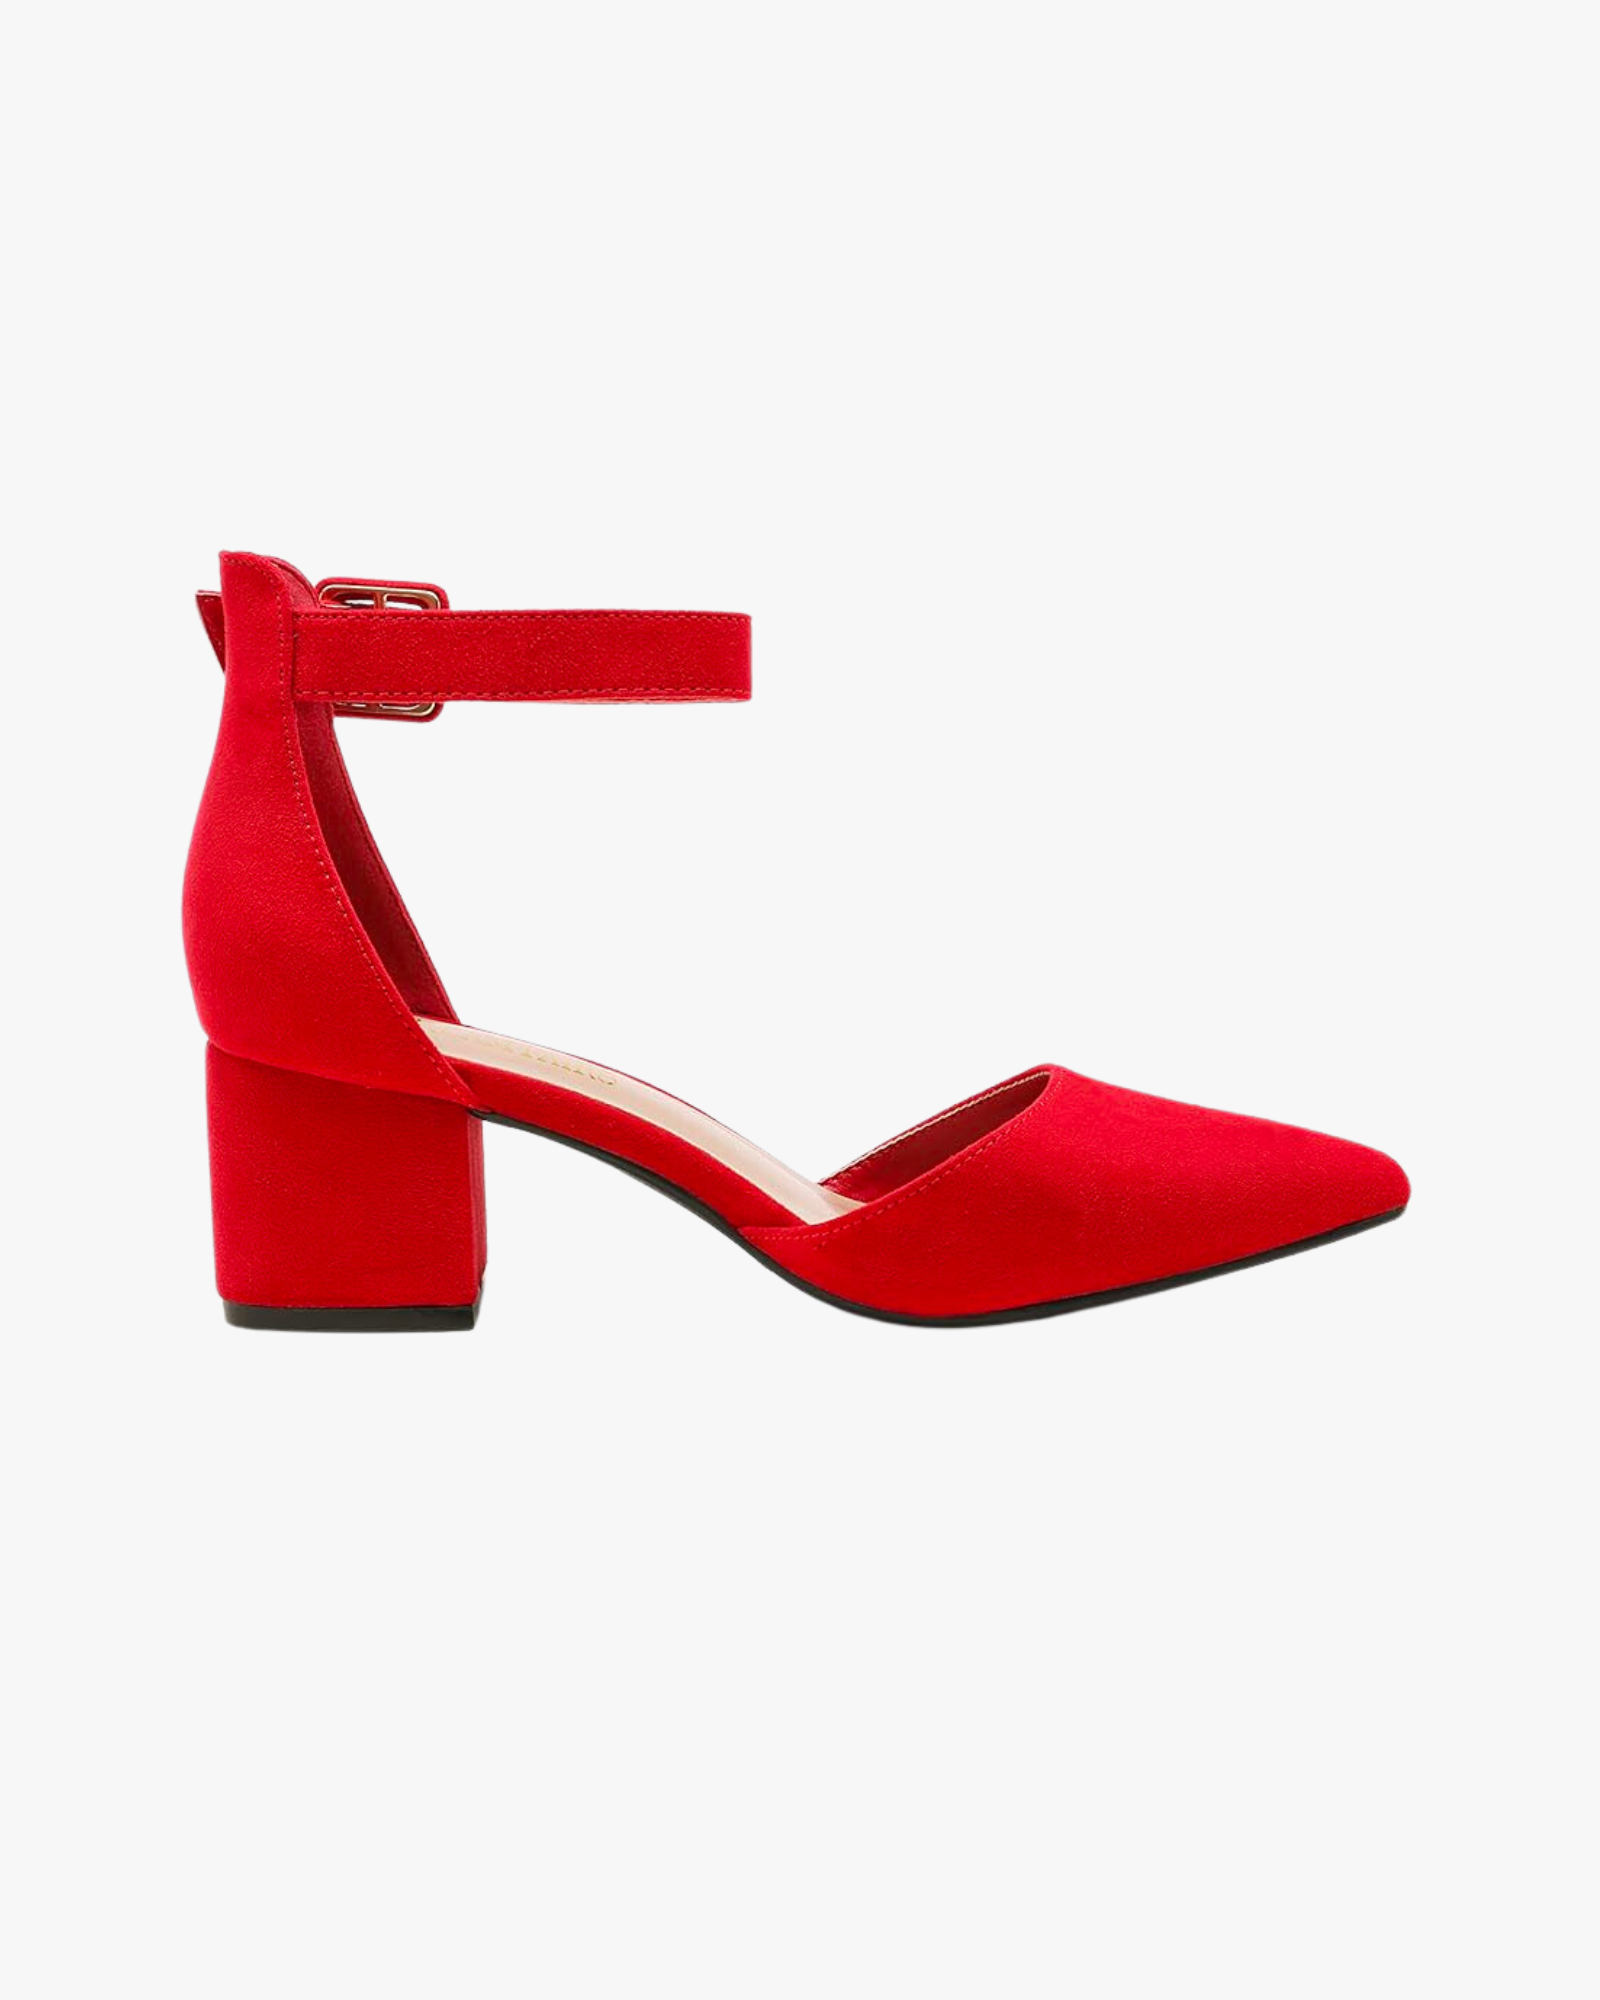 The 20 Best Platform Heels That Make the Most of This Trend | Marie Claire